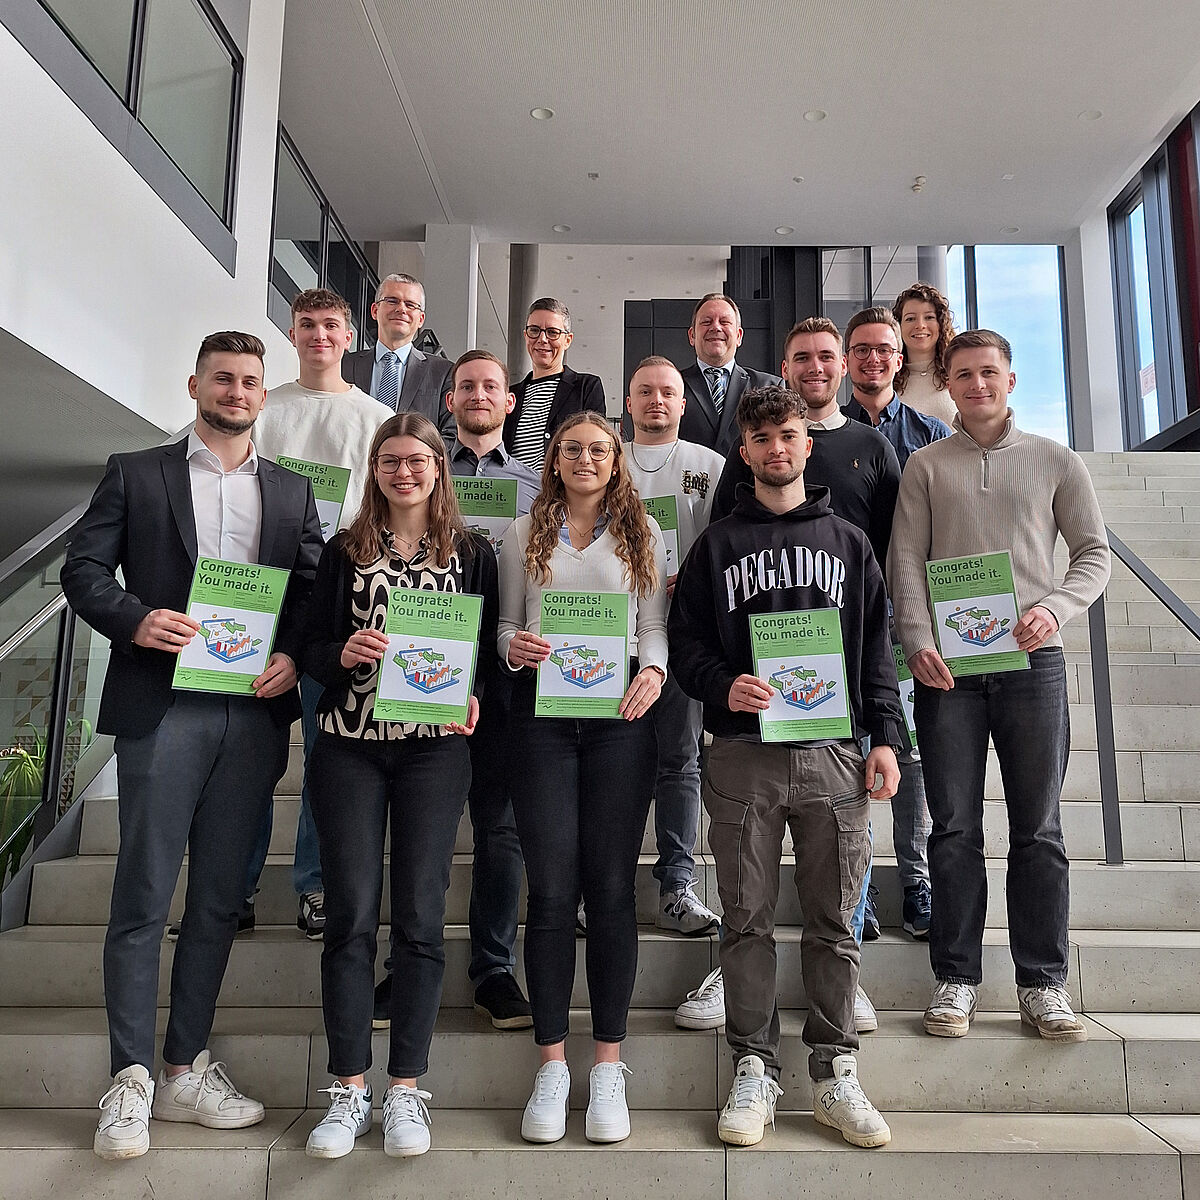 Students from the University of Paderborn rewarded for their successful participation in the savings bank “Stock Market Simulation Game”